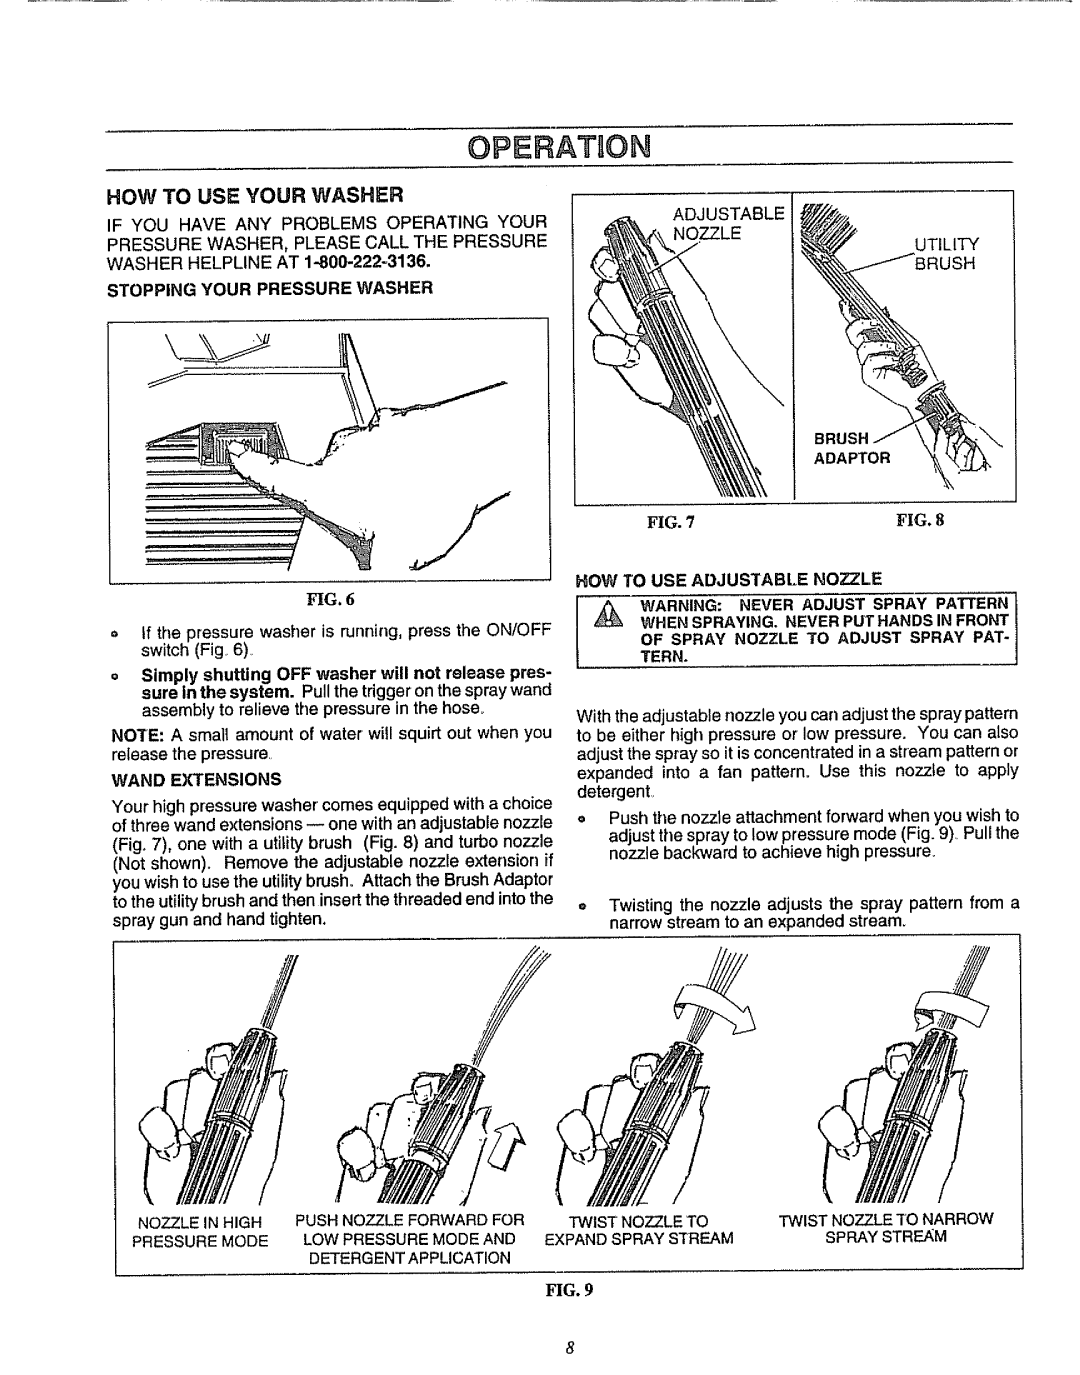 Sears 580.75133 owner manual Opebatbon, How To Use Your Washer, Stopping Your Pressure Washer, Wand Extensions 